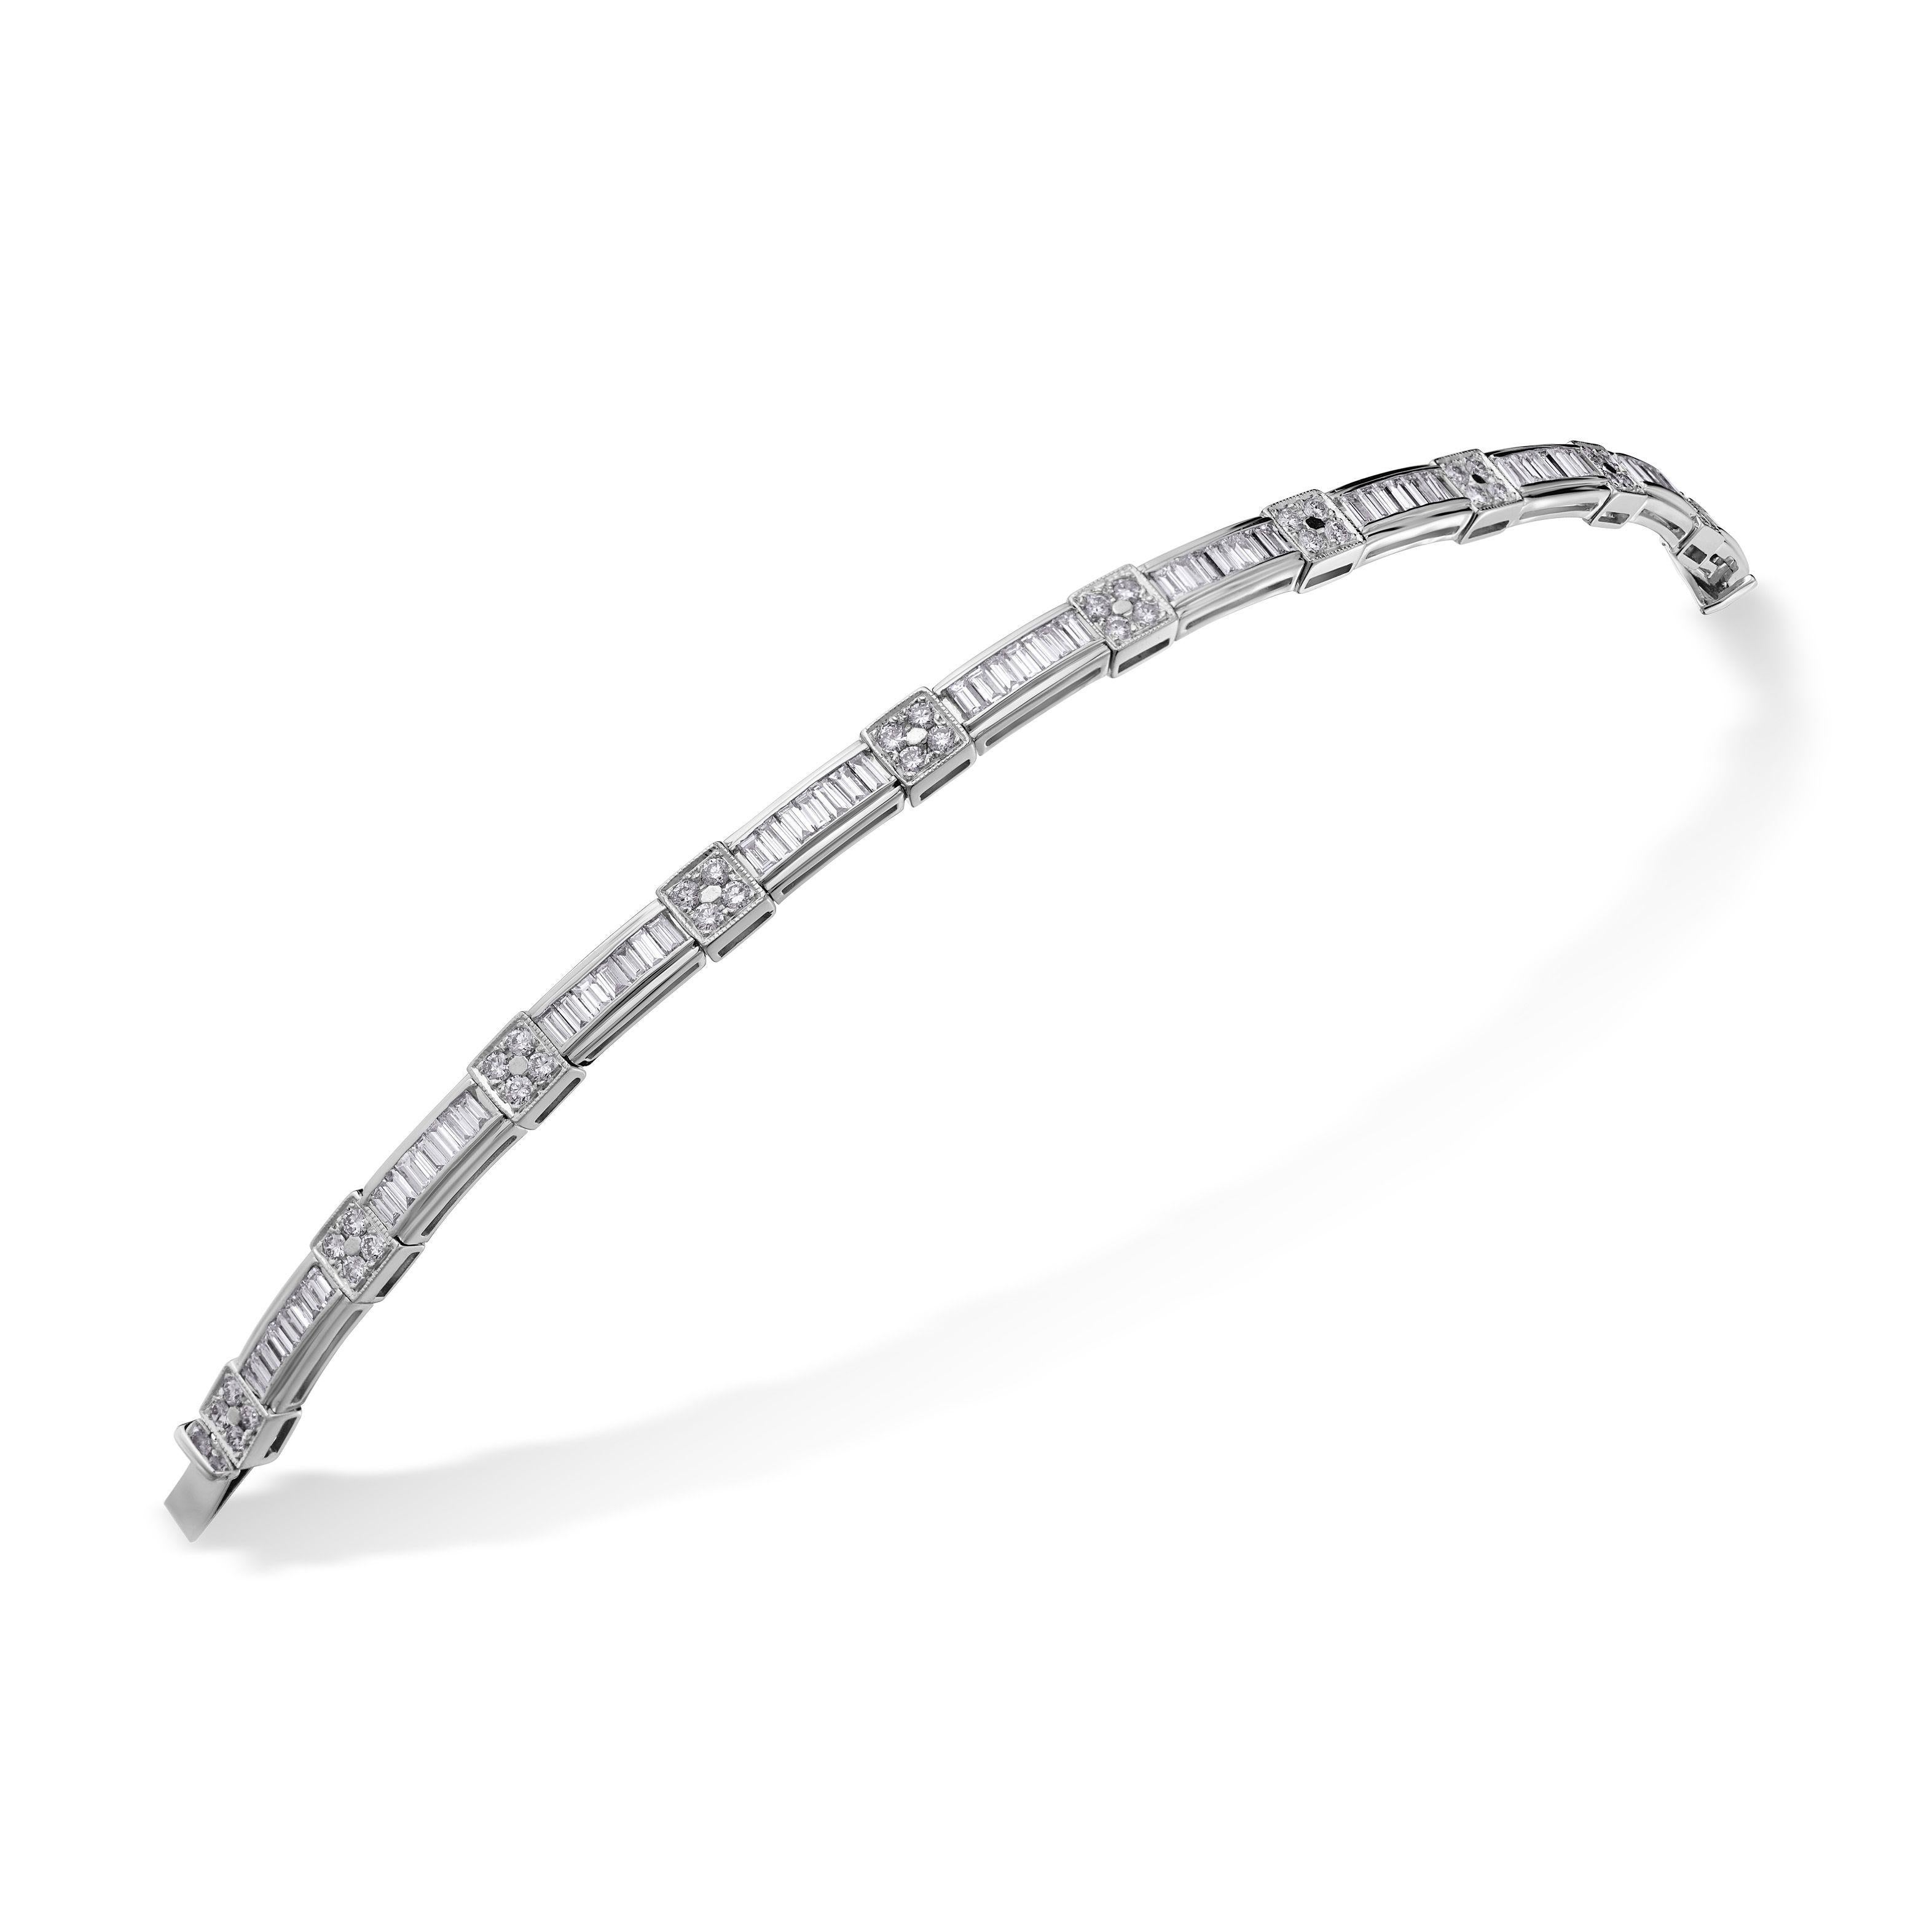 Simply Beautiful! Elegant and finely detailed Art Deco Revival Diamond Semi-Articulated White Gold Bracelet. Decorated with 10 square links, each adorned with 4 round Brilliant-cut Diamonds. Each link is separated with 1 horizontal rectangle,